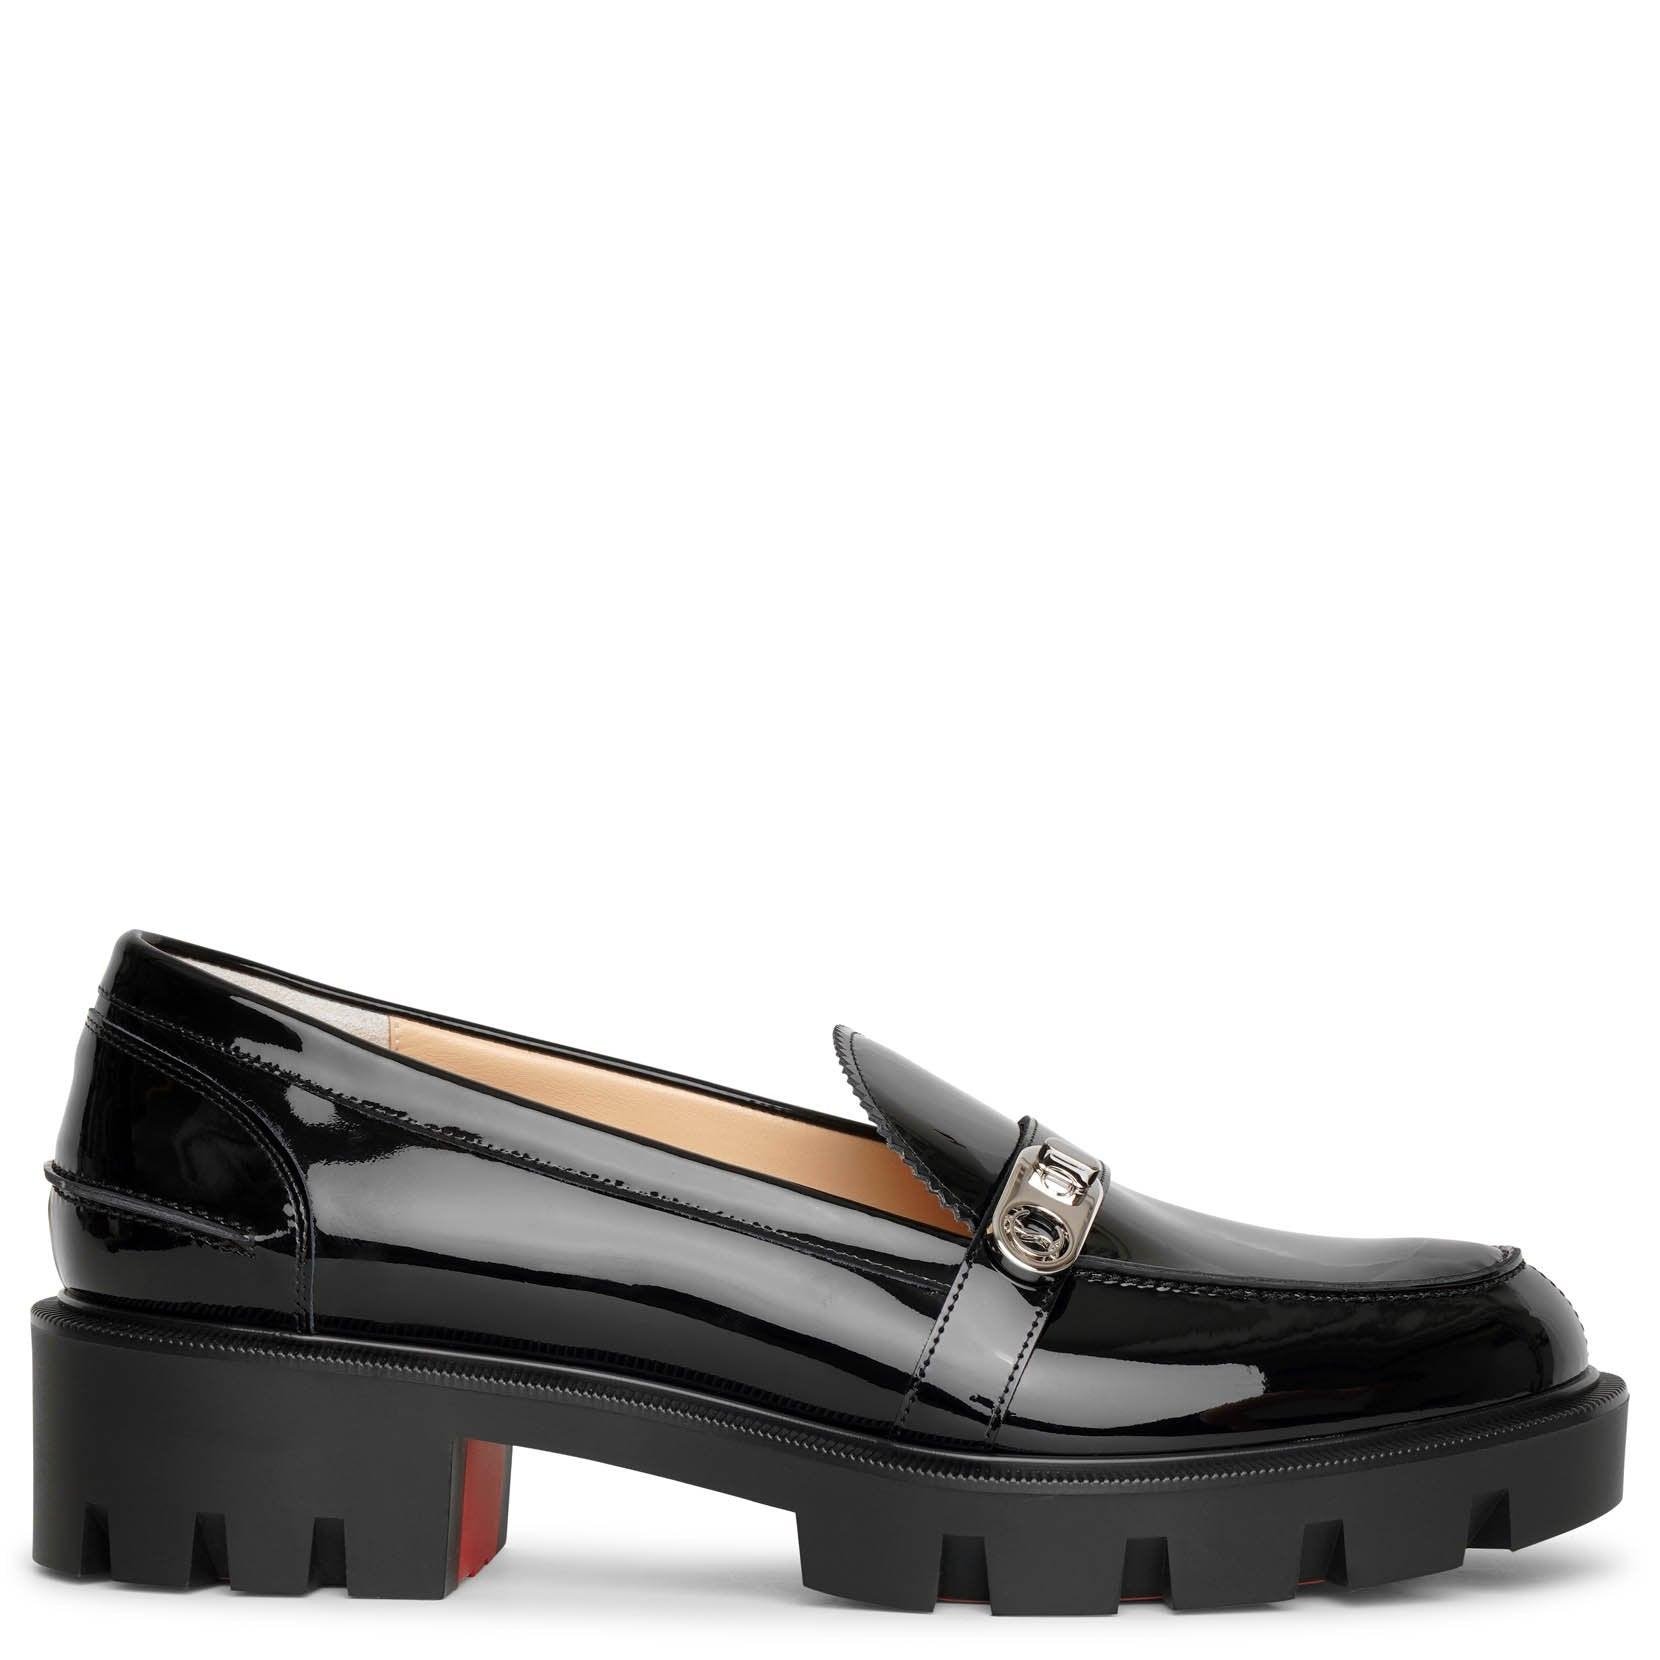 Christian Louboutin Leather Lock Woody Flat Patent Loafers in 